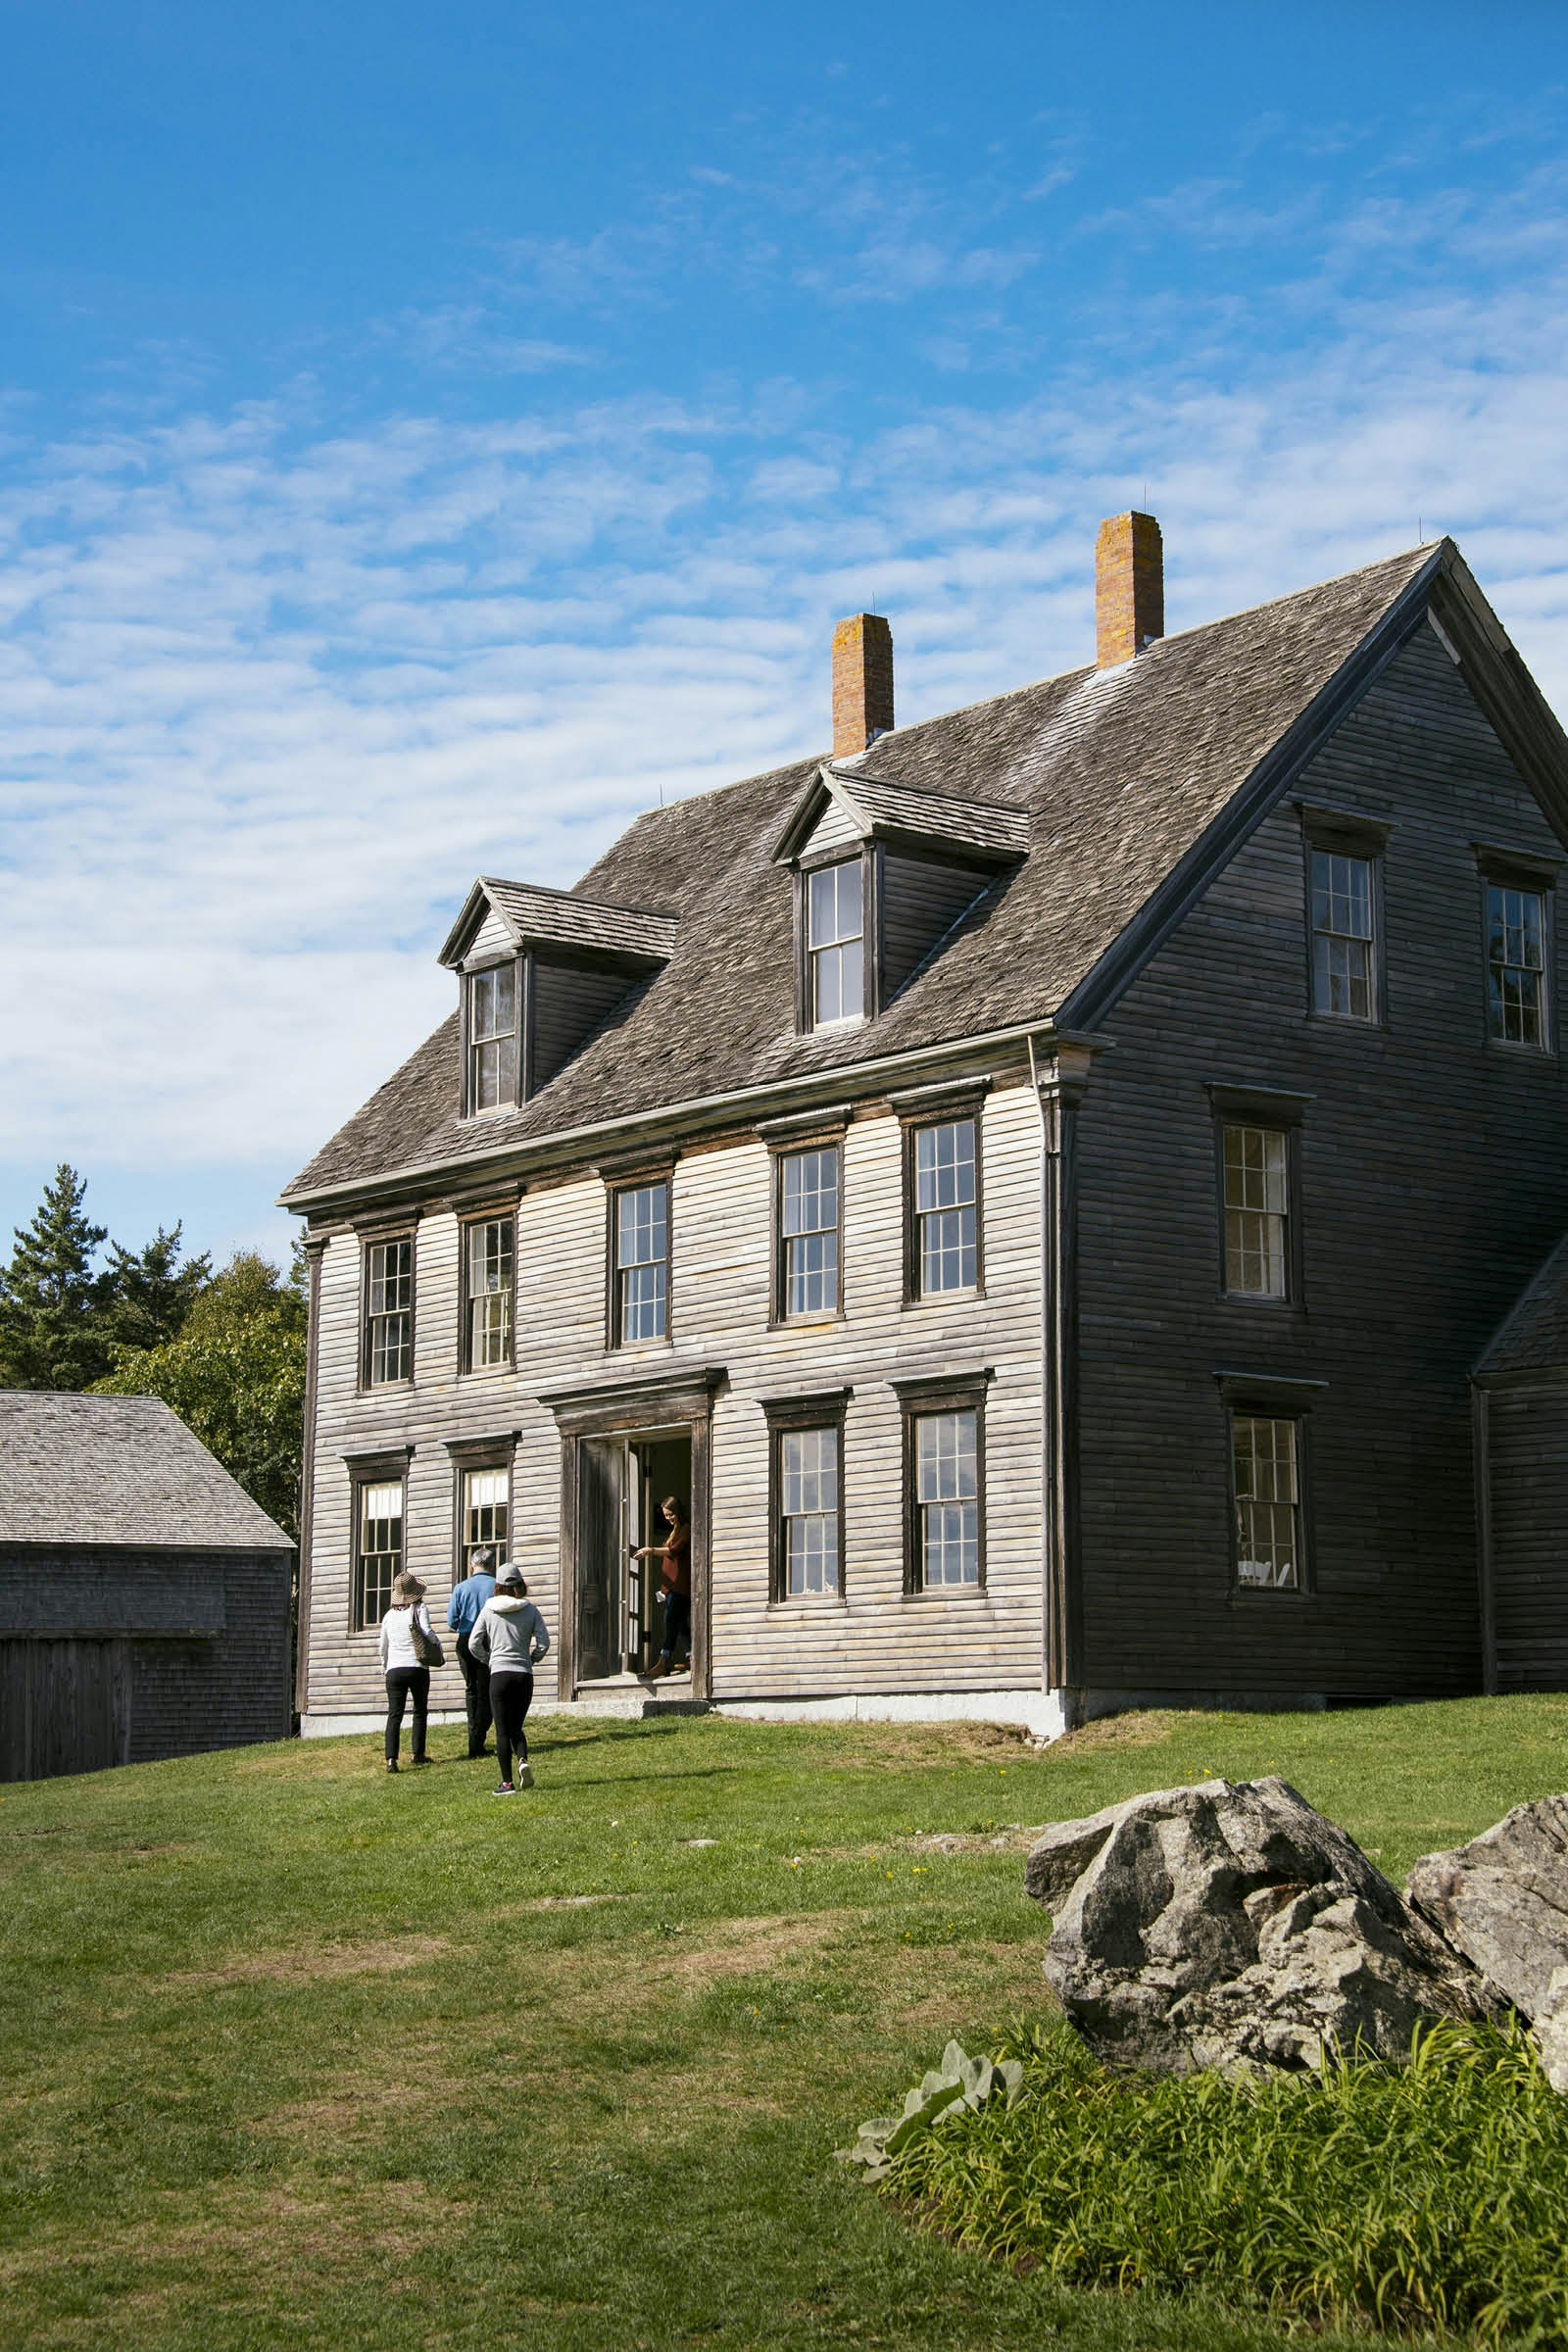 The historic Olson House outside Rockland